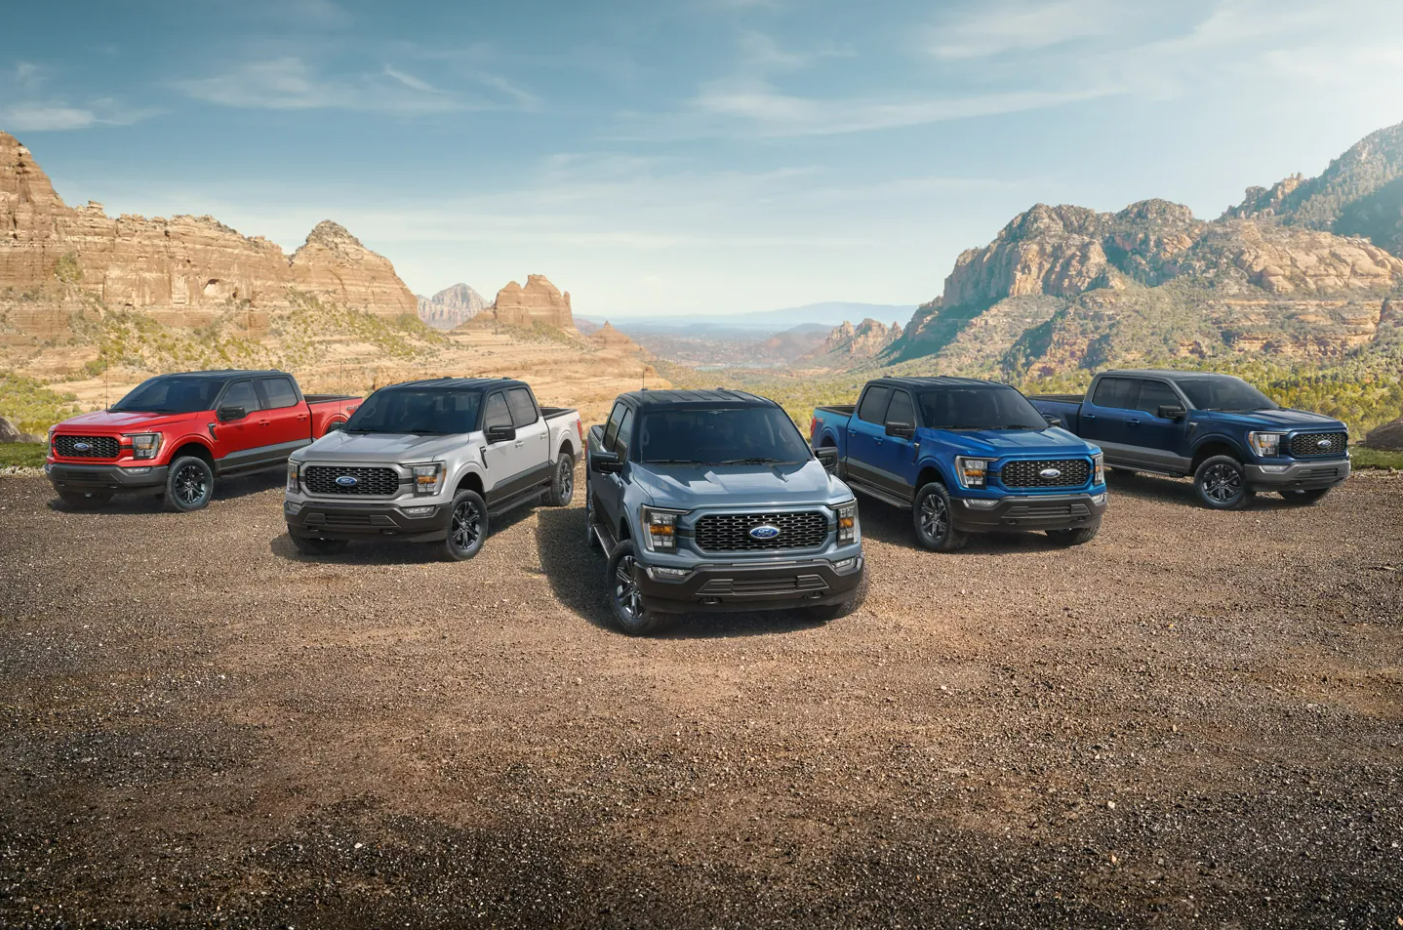 A v-formation of different colored 2023 Ford F-150s on a desert plain.